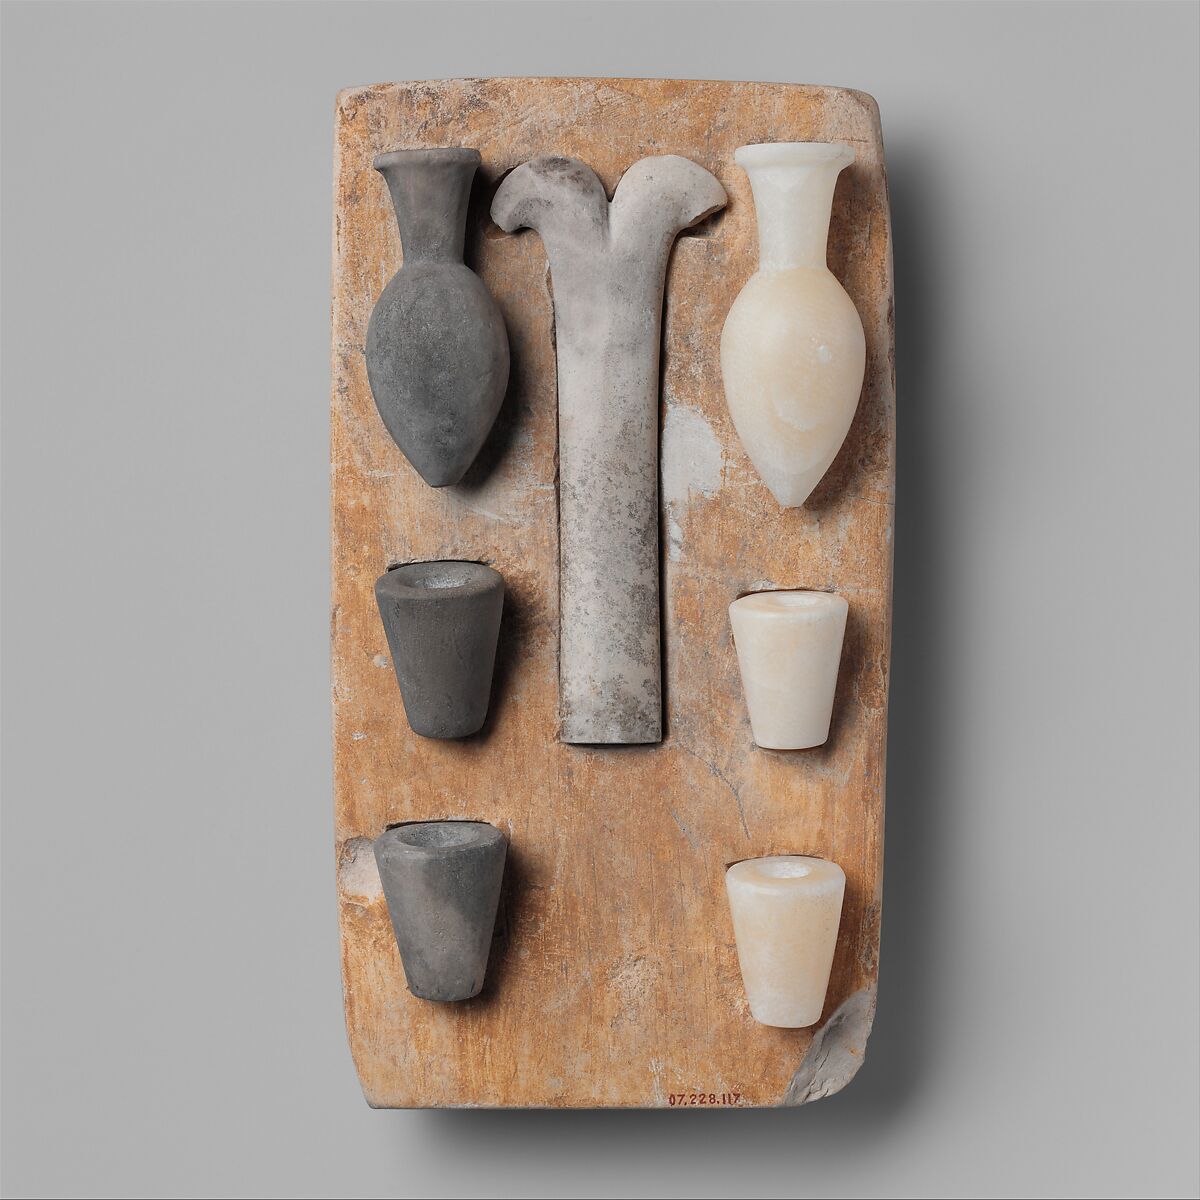 Model of the "Opening of the Mouth" ritual equipment, Tray: limestone; vessels: Travertine (Egyptian alabaster), greywacke 